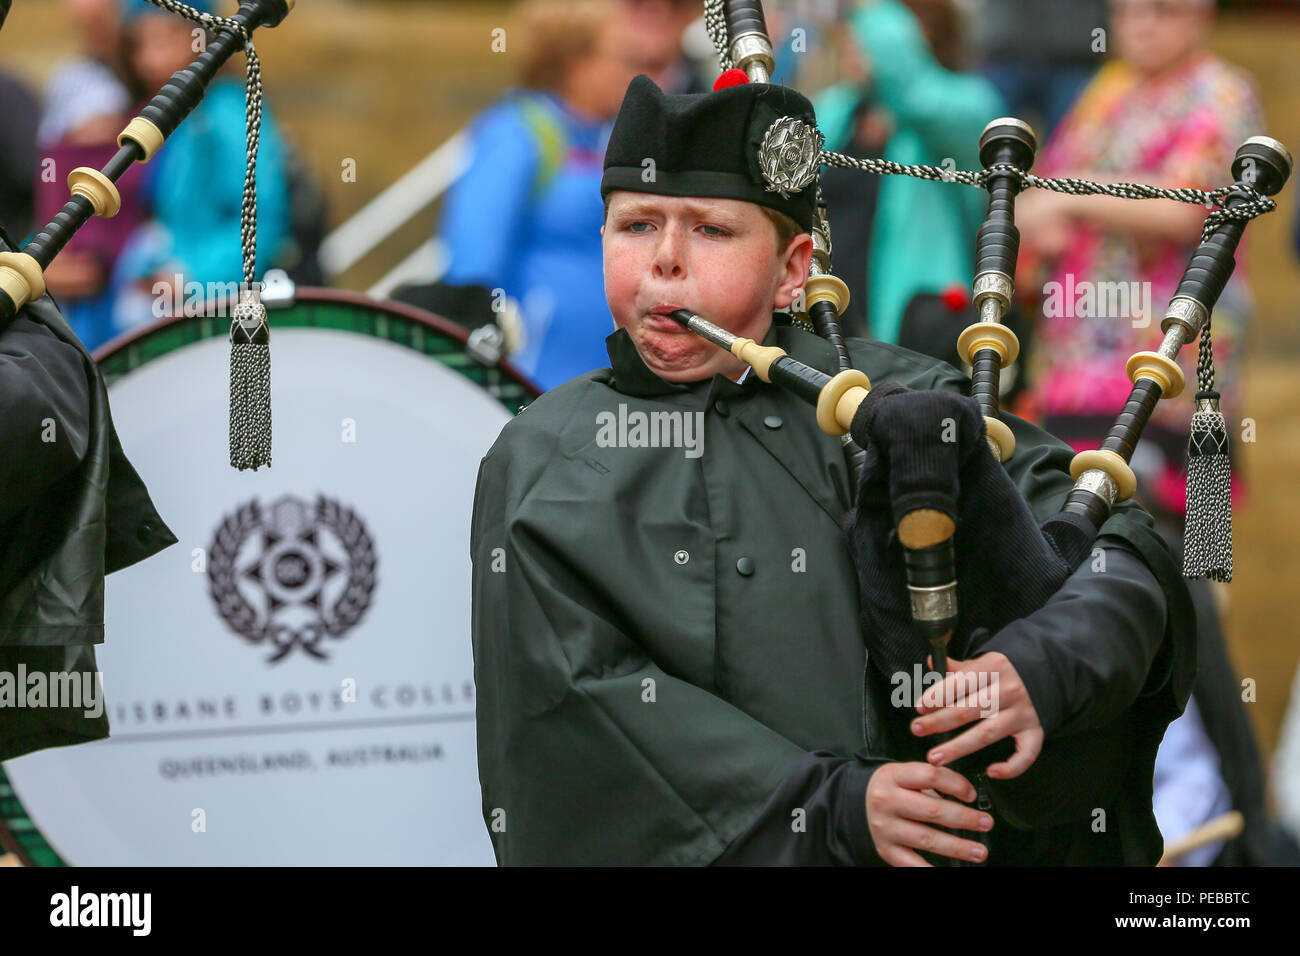 Glasgow, UK. 14th Aug 2018. Rain didn't stop play for the Brisbane Boys College Pipe Band from Australia who entertained the public by playing in rain showers in Buchanan Street, Glasgow. The World Pipe Band Championships are on Saturday 18 August with Pipe bands from around the world competing for the title. Liam Docherty from Brisbane is one of the pipers Credit: Findlay/Alamy Live News Stock Photo